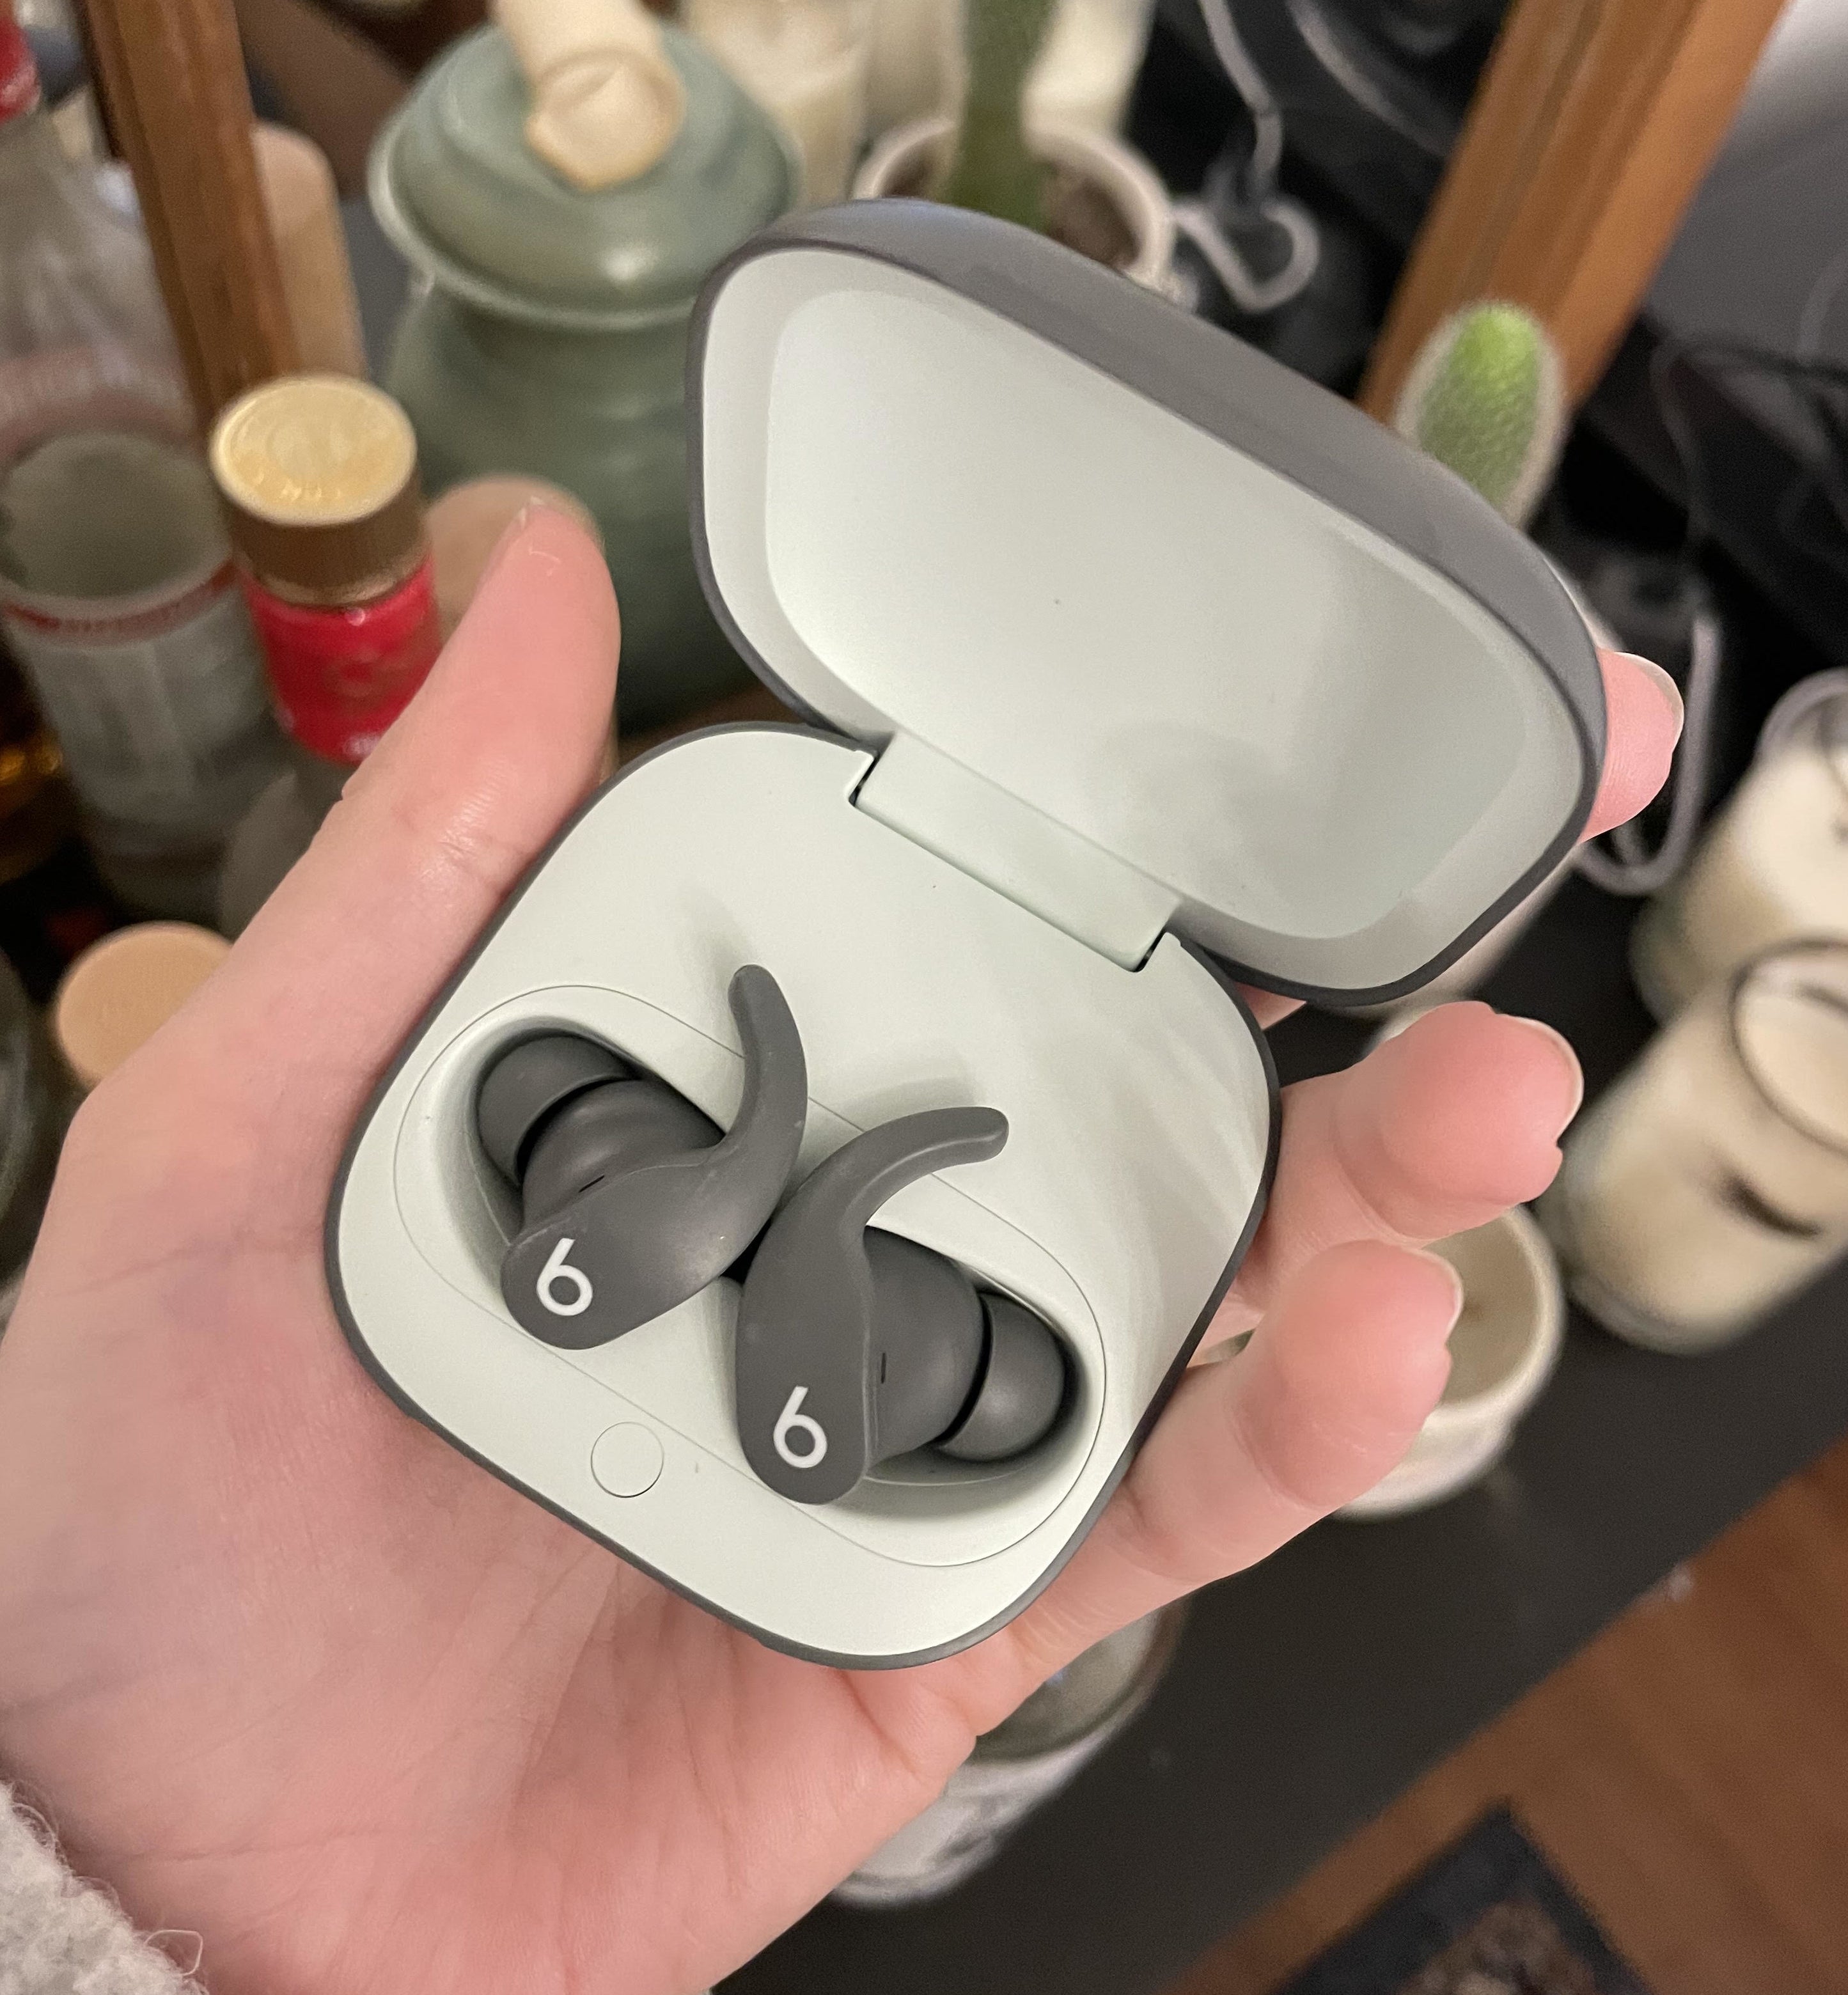 Alice holding the earbuds in their case